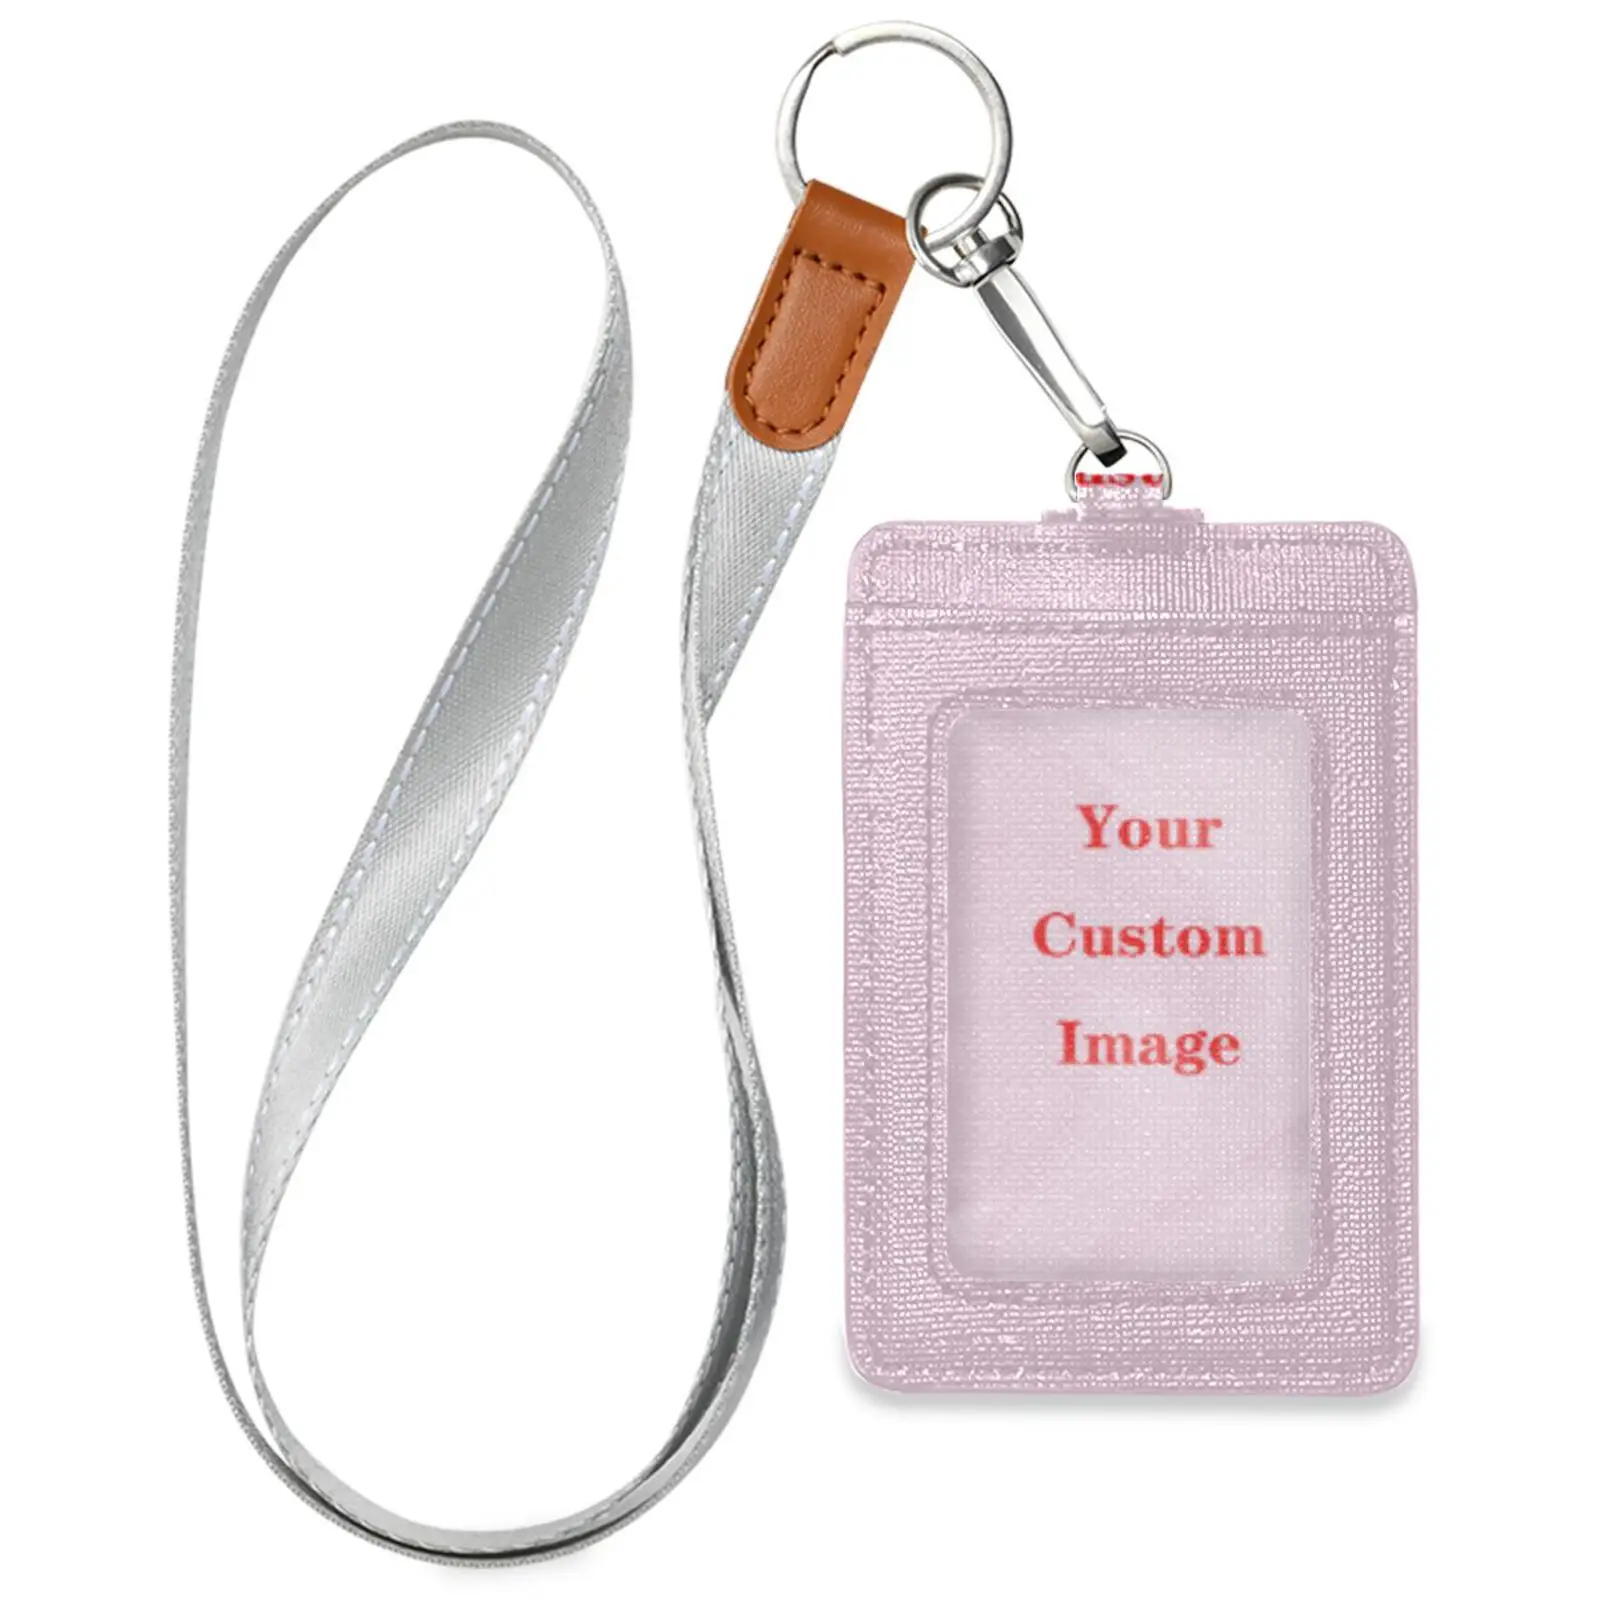 Customized image Leather ID Card Sleeve Japanese Style Easy Pull Buckle Lanyard Card Bag Neck Hanging Work Card Holder New